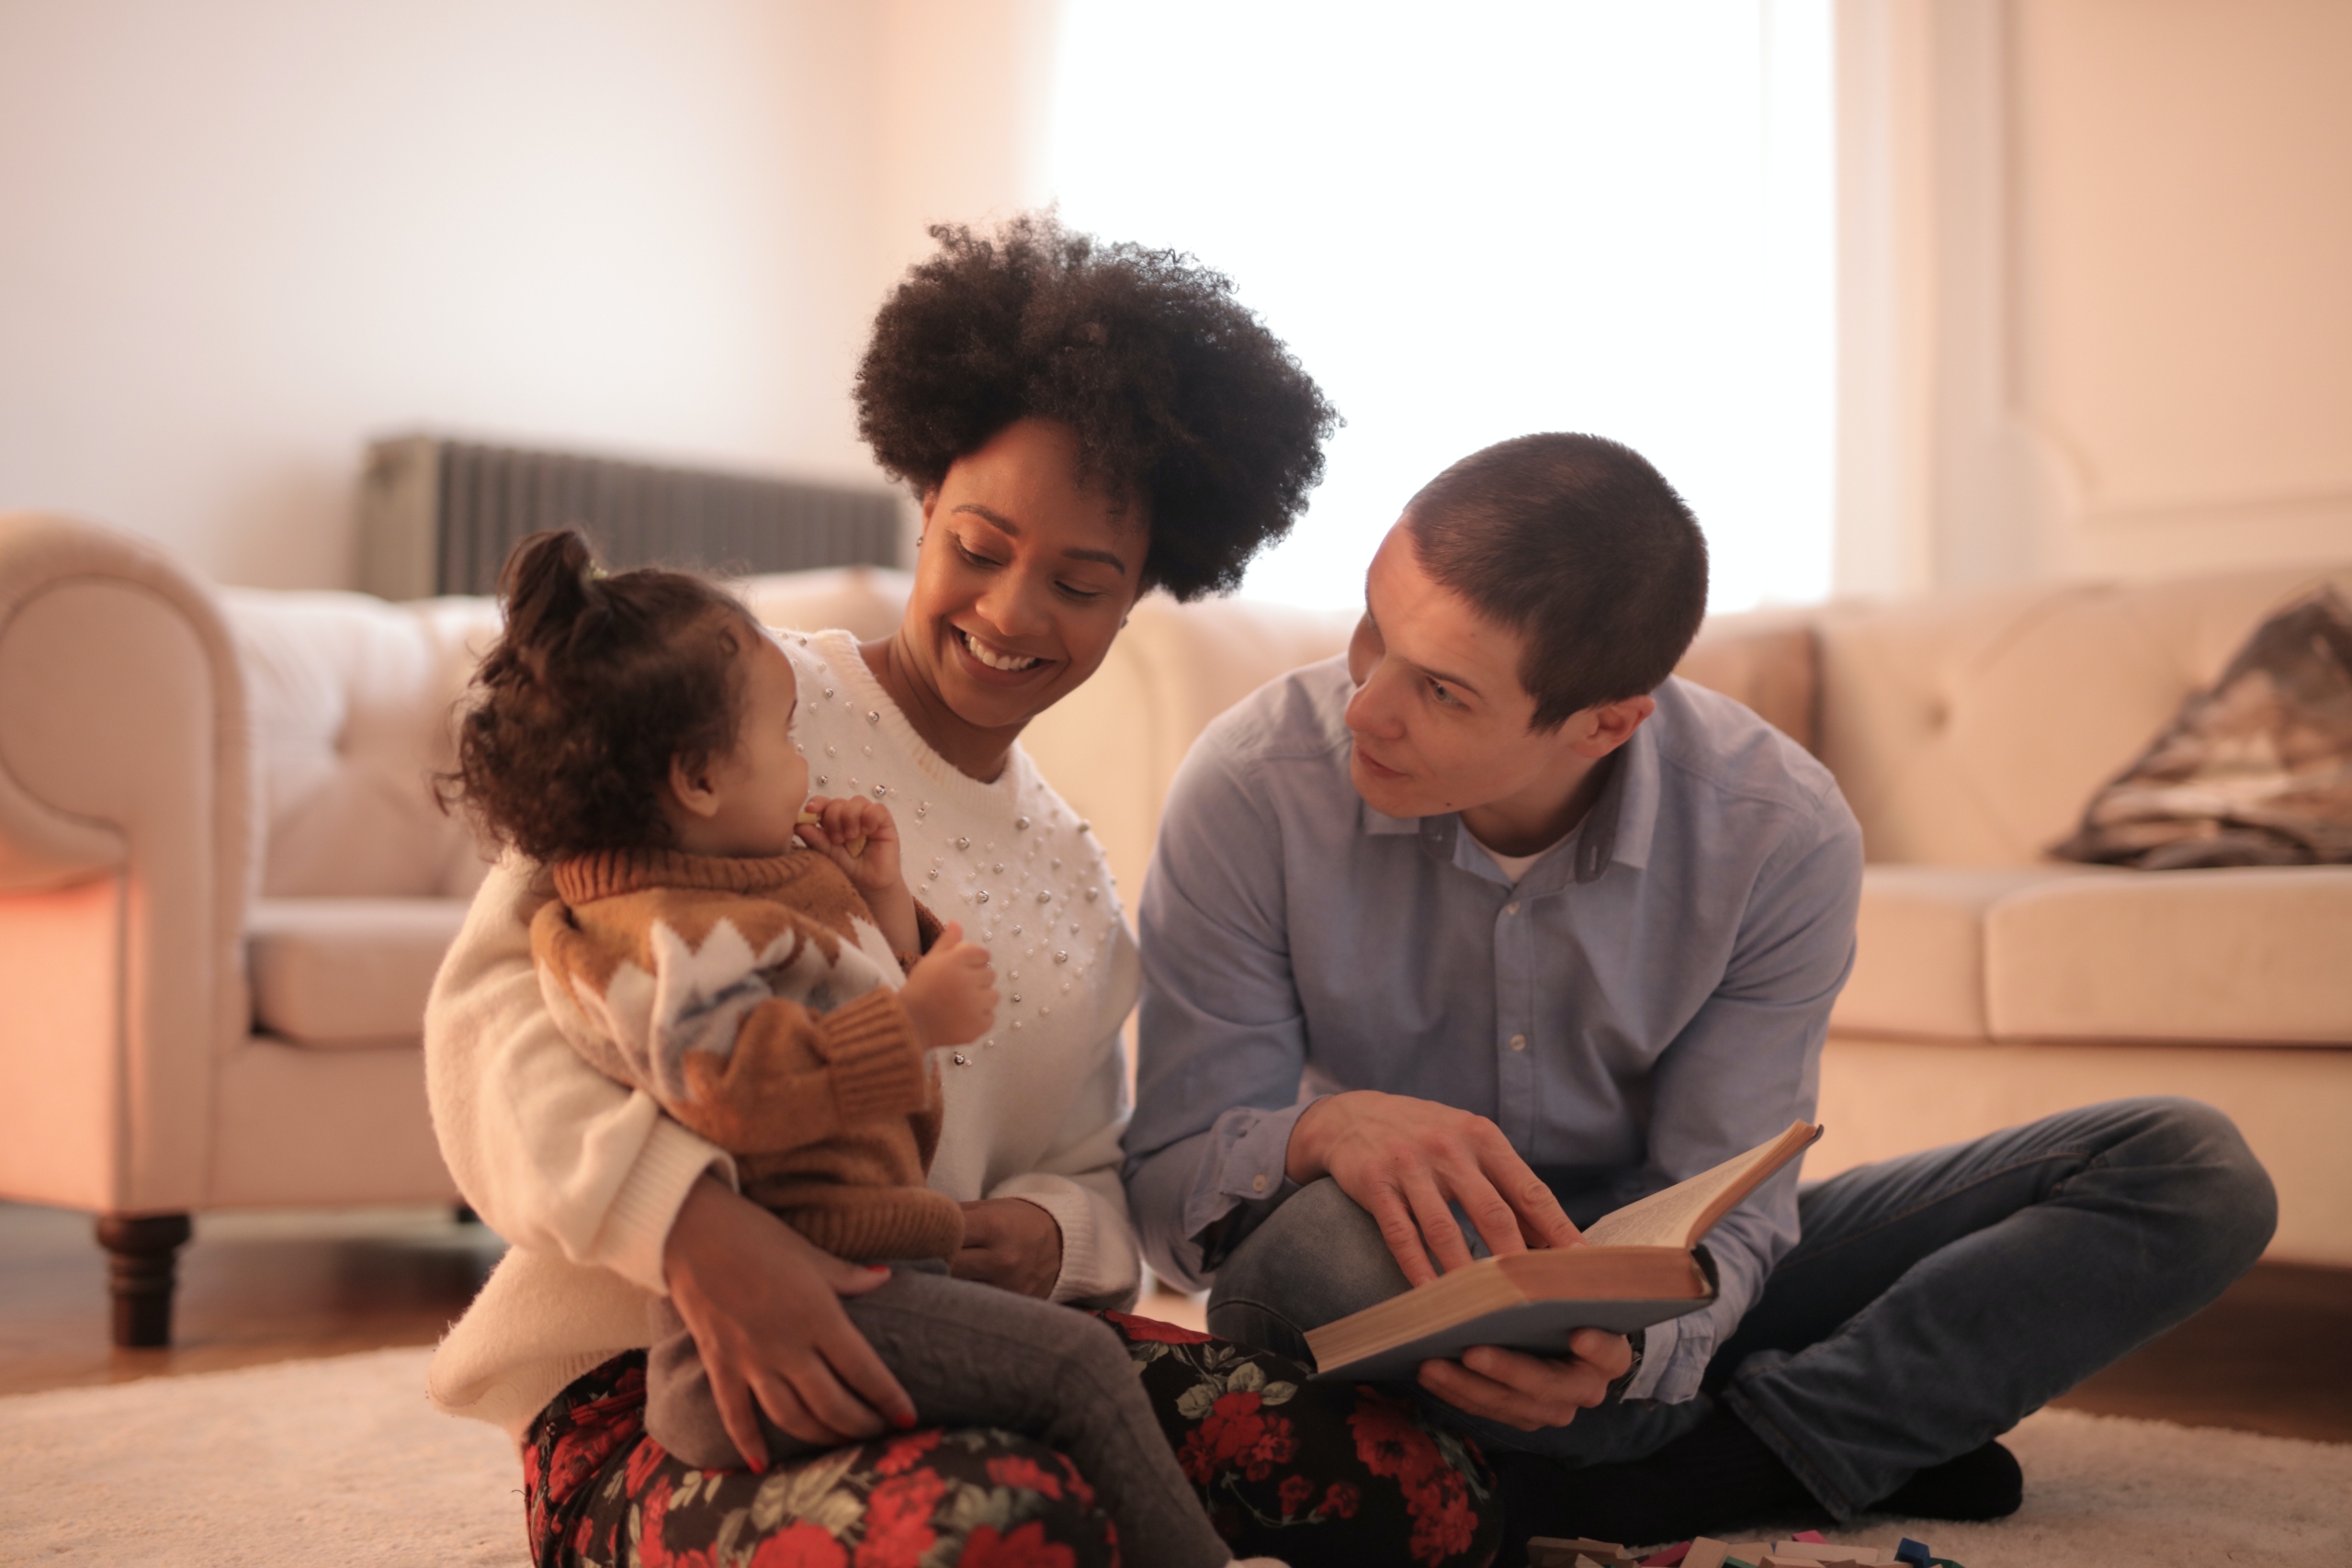 A woman, man, and toddler sitting on the floor reading a book, a good practice according to Child Care Aware of America